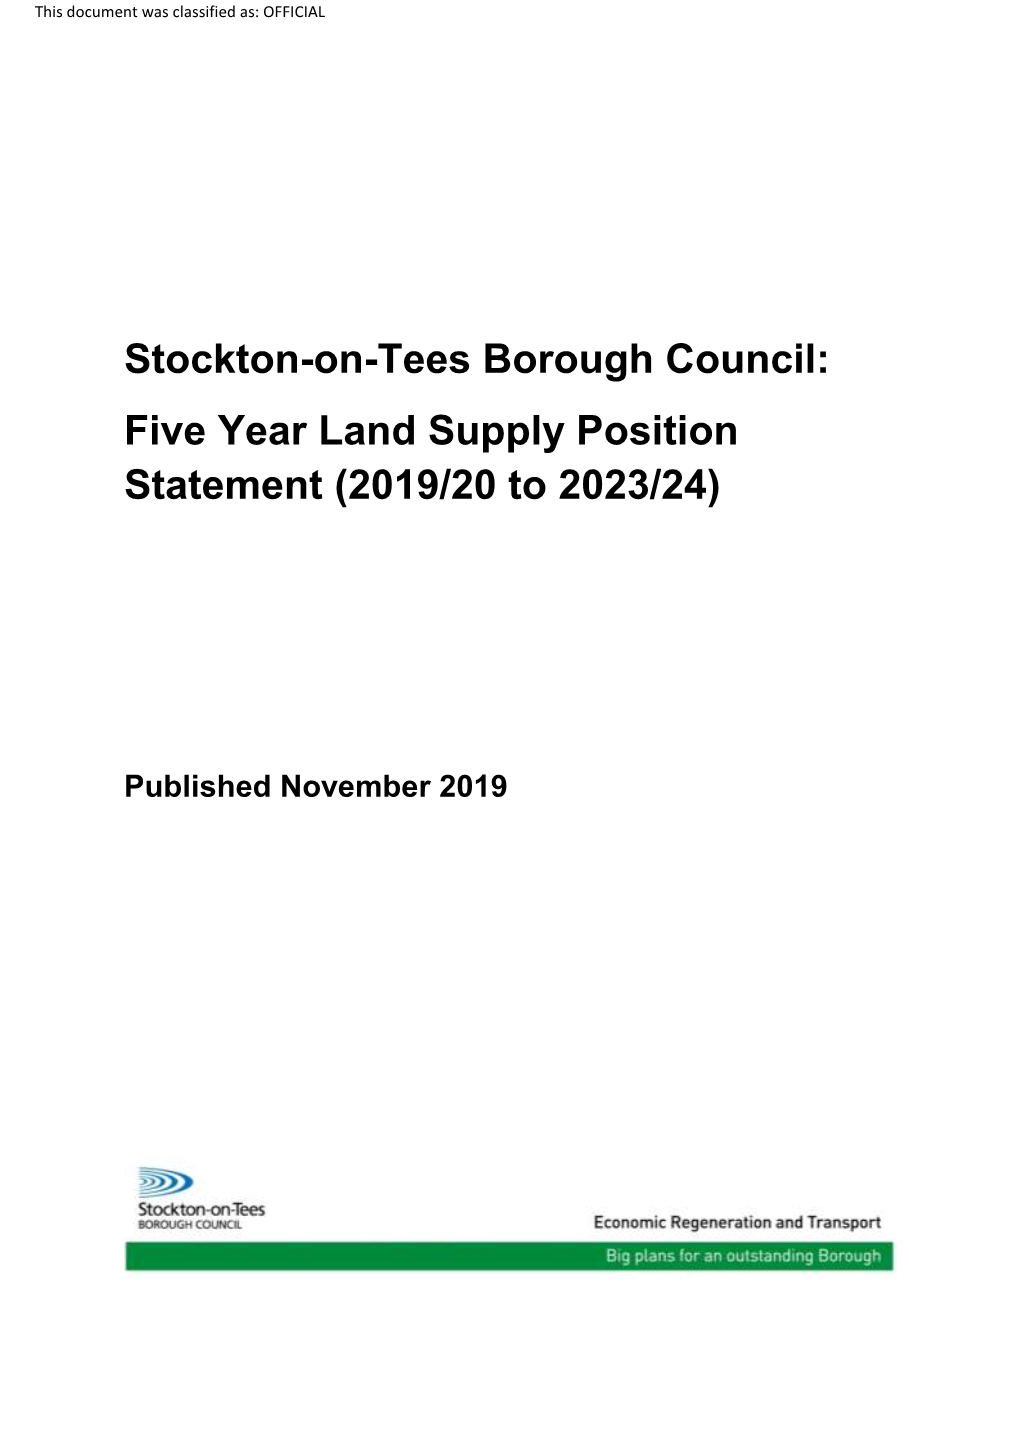 Five Year Land Supply Position Statement (2019/20 to 2023/24)